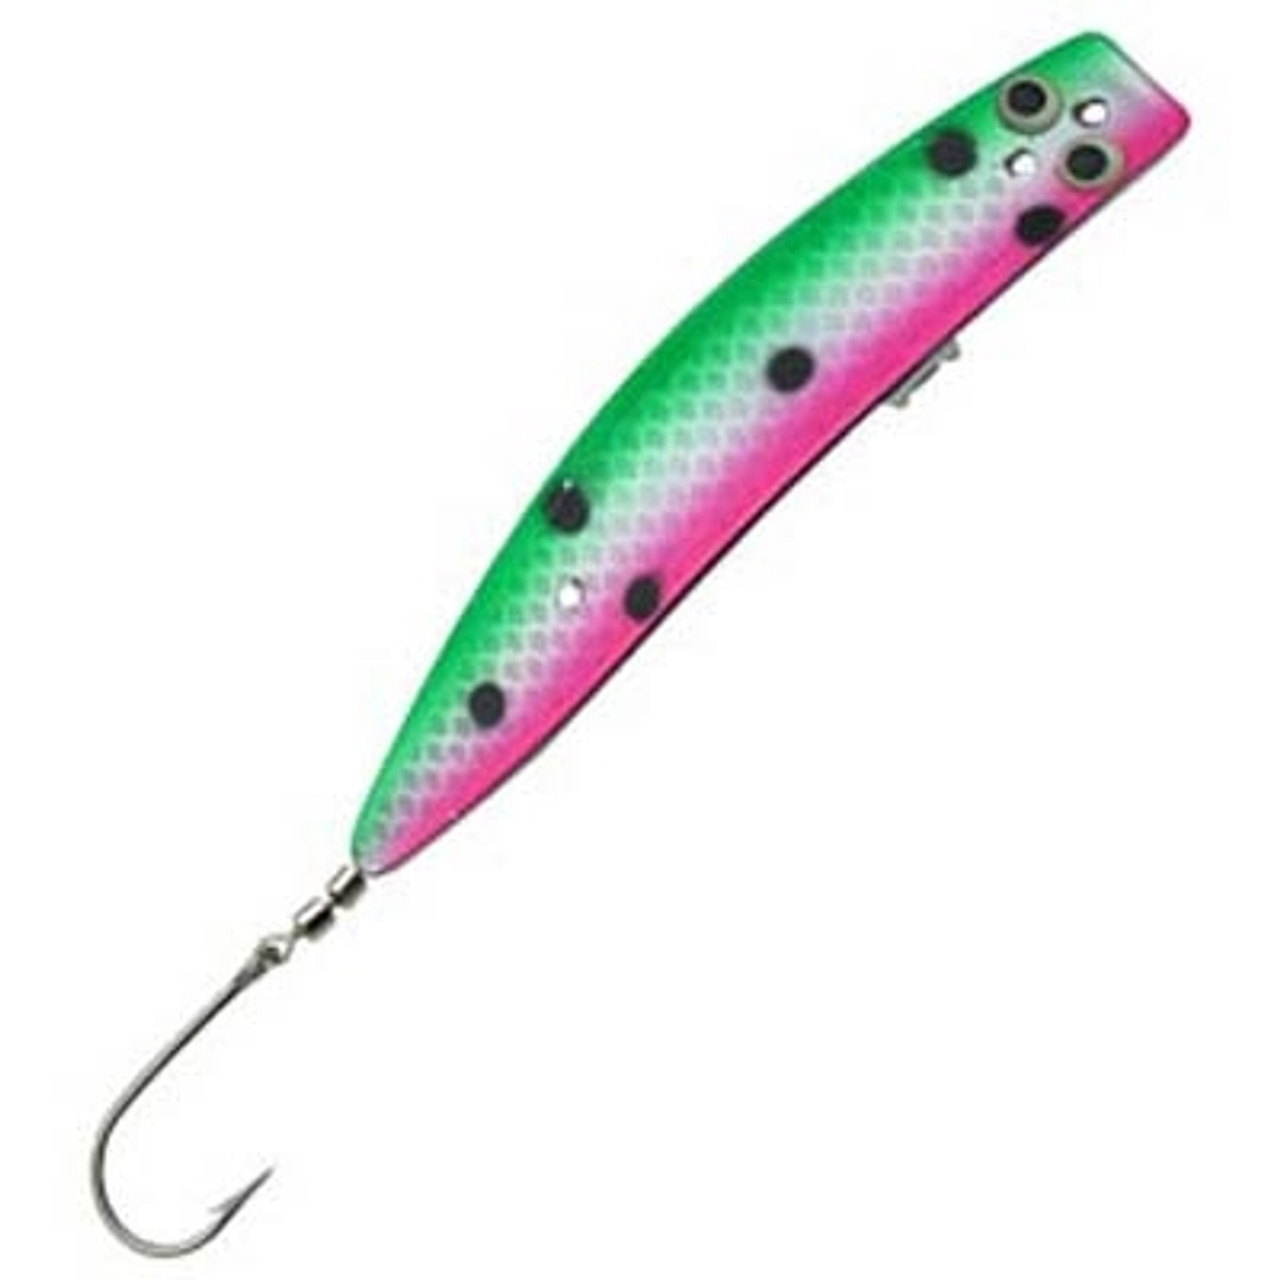 fish trolls lures, fish trolls lures Suppliers and Manufacturers at